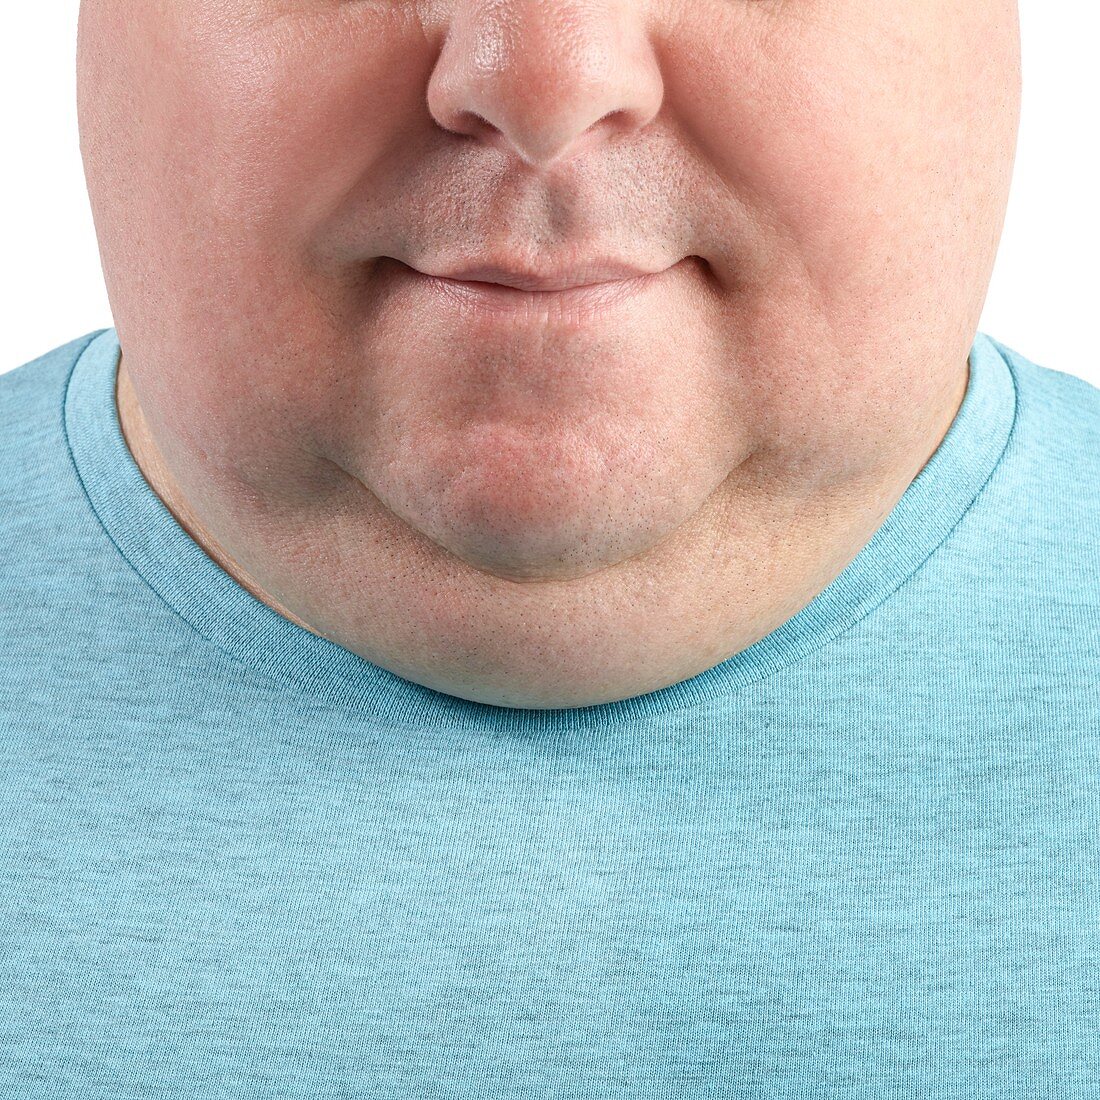 Overweight man's chin and neck